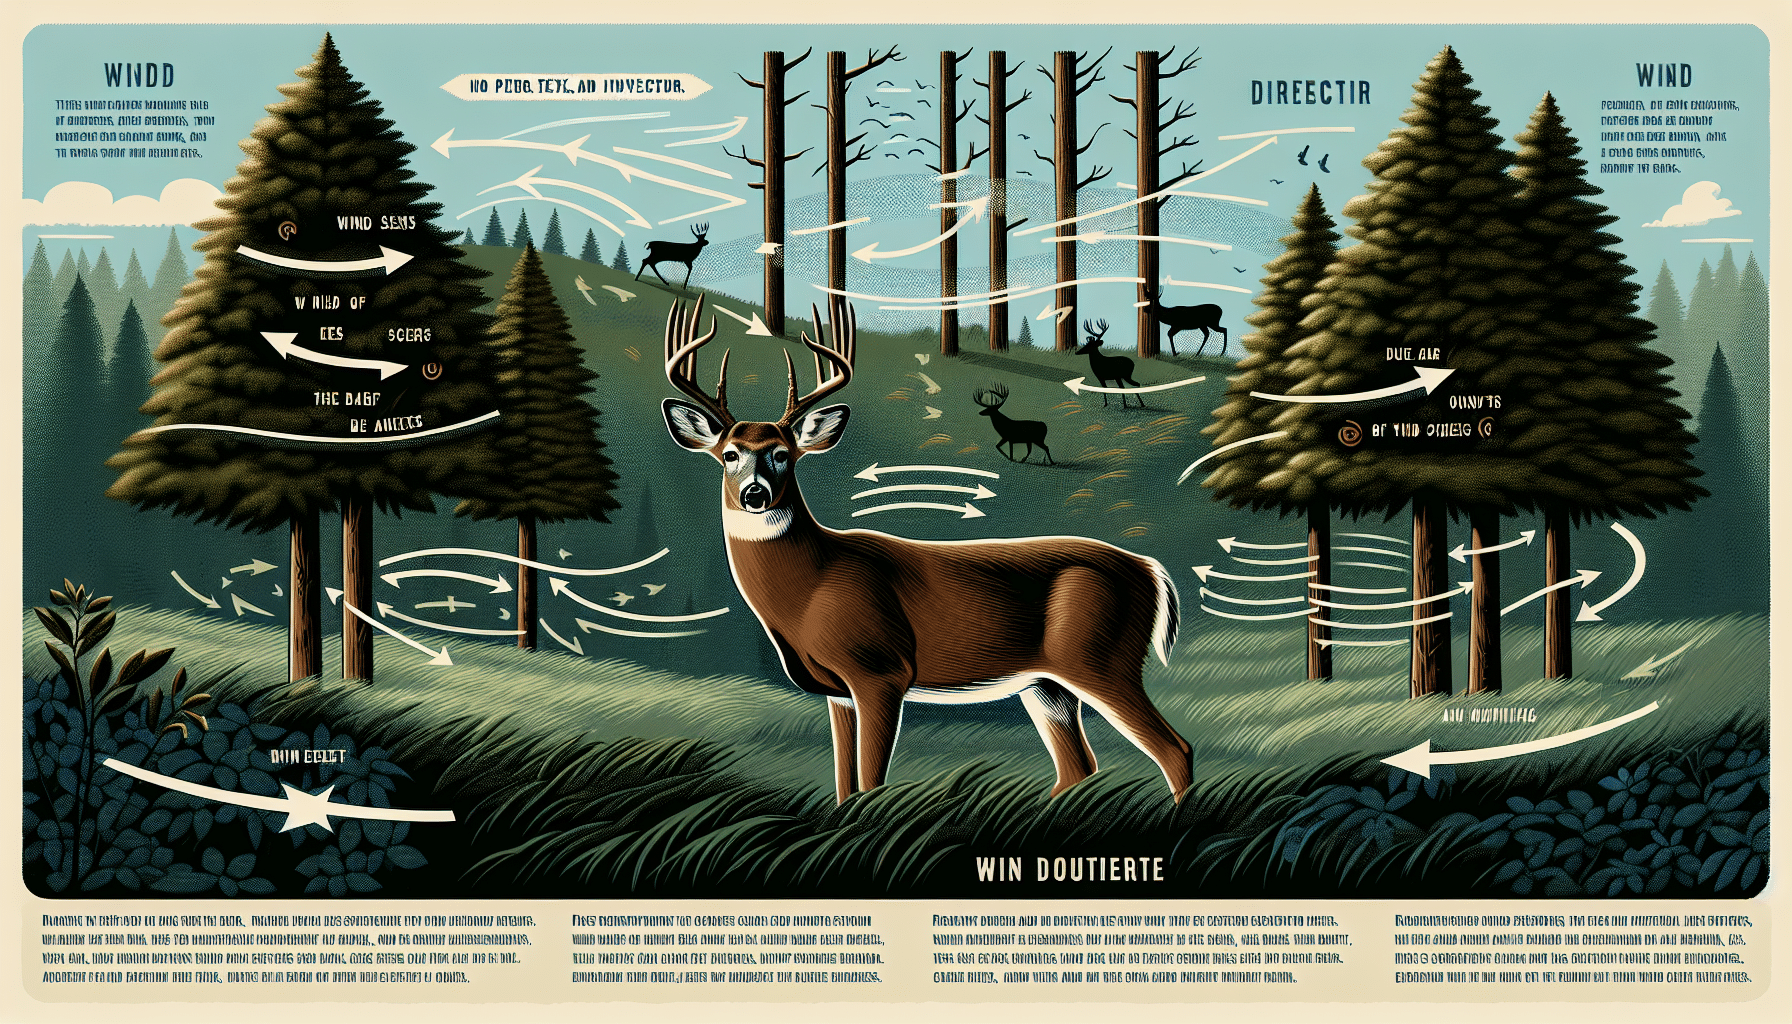 An educational diagram illustrating how wind affects deer hunting where deer, trees, and wind are the main elements. Picture a calm environment in the depths of the forest. A white-tailed deer, all ears and alert, facing to the right. In the distance, several tall trees are scattered, casting long shadows. Beyond them, a touch of wind is shown by the slight sway of the tree branches and the rustling leaves. Arrows pointing in various directions should symbolize wind patterns, showing direct and indirect ways the wind could carry scents or noises, which can alert the deer. Remember, no person, text, or brand logos in the image.